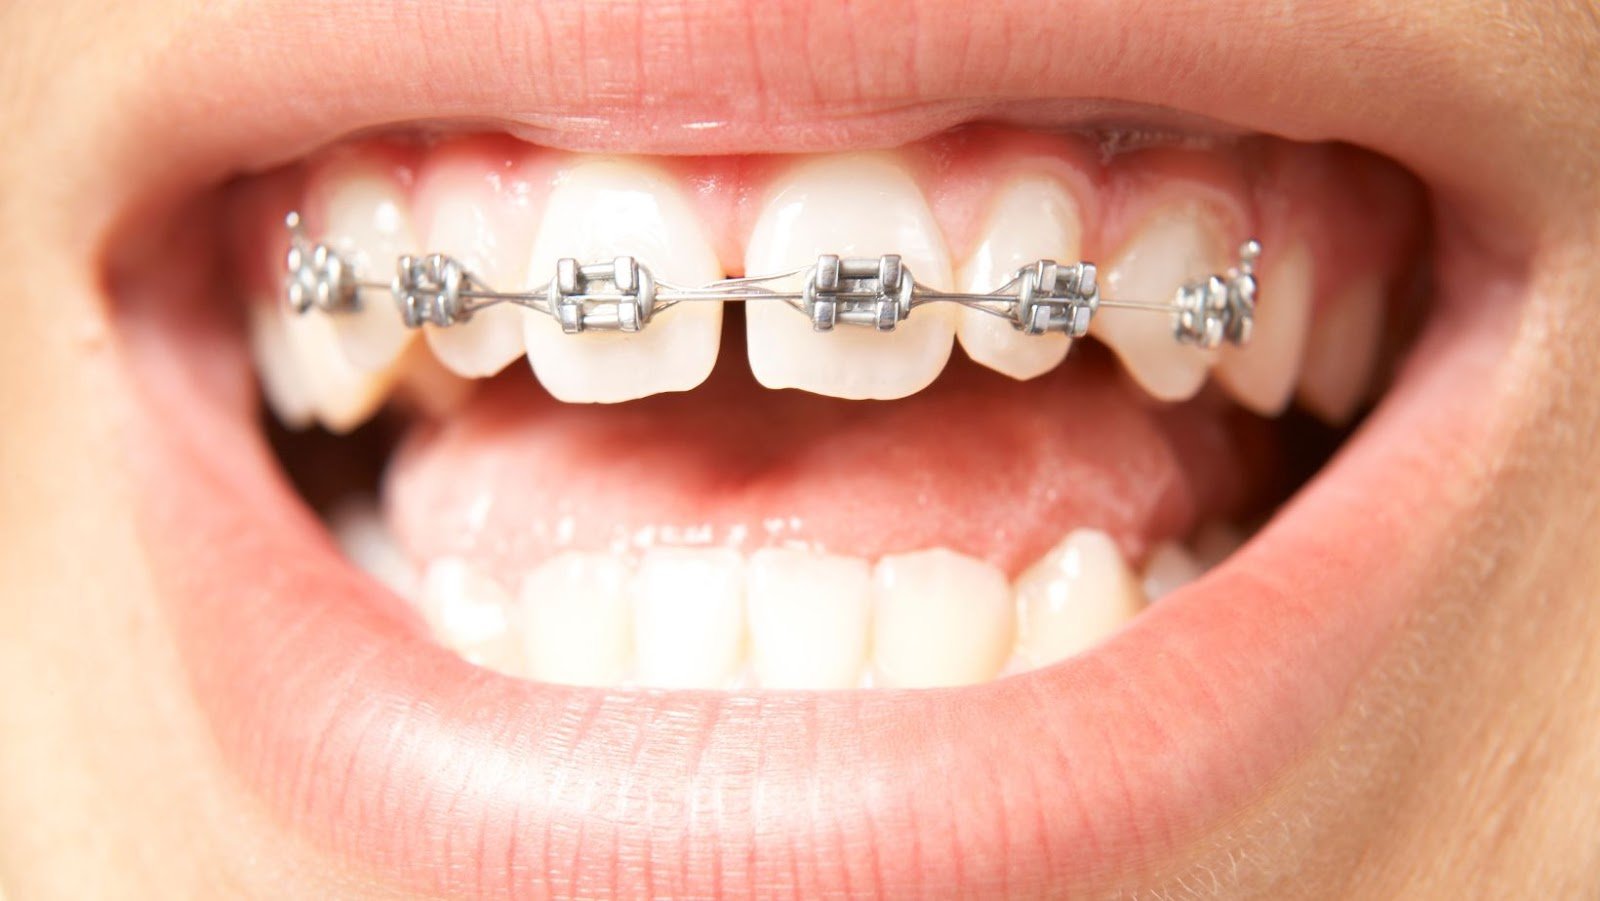 Wish to Get Braces for Teeth? 4 Things to Know First